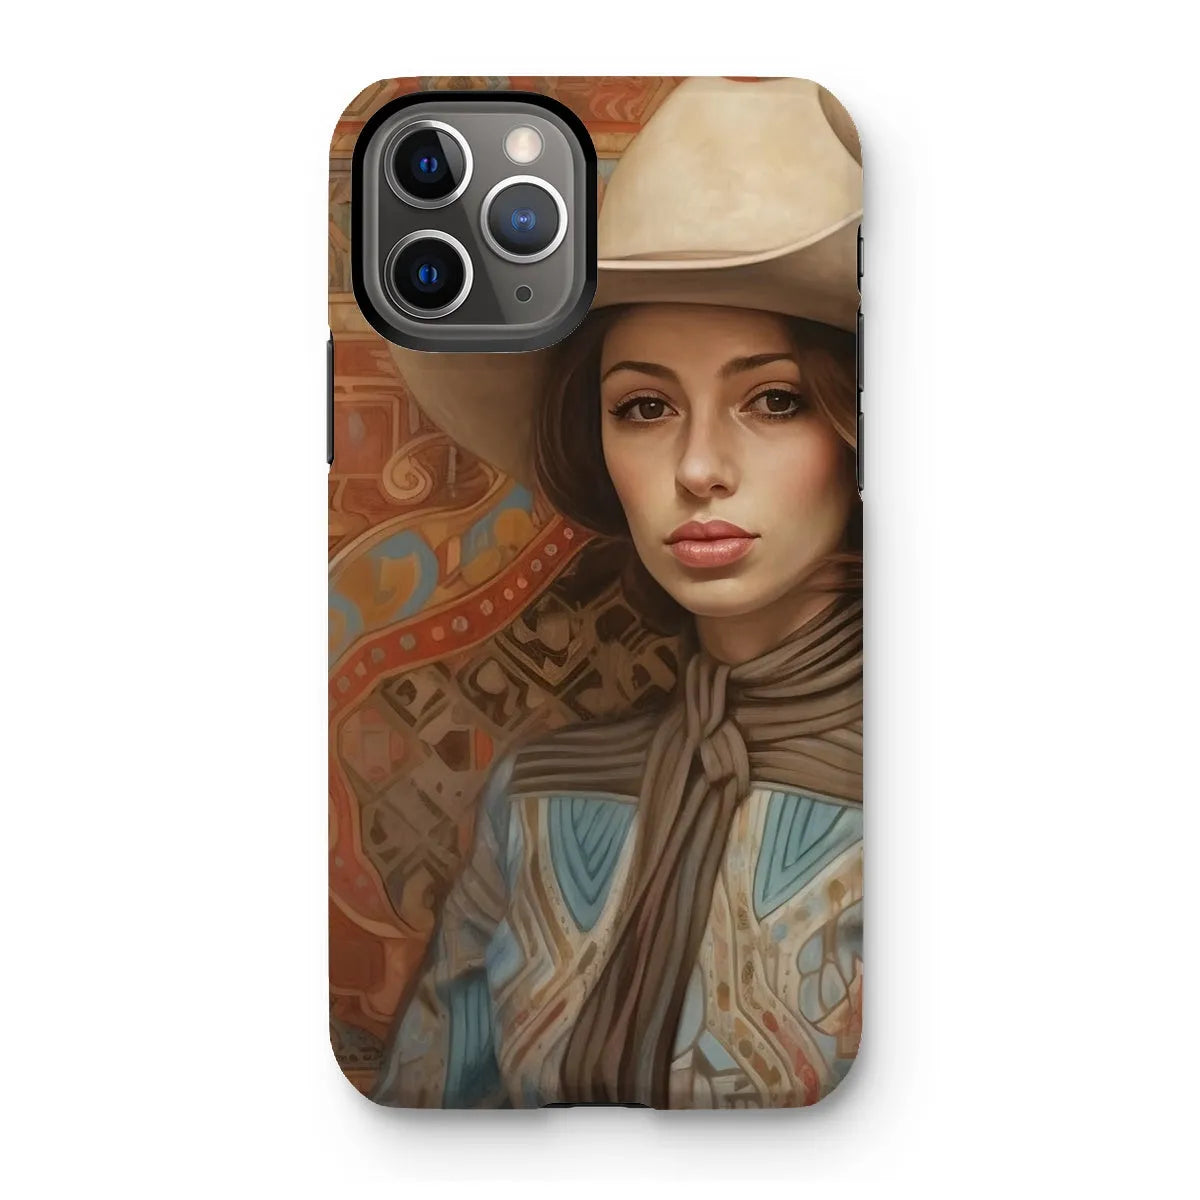 Anahita The Lesbian Cowgirl - Sapphic Art Phone Case - Iphone 11 Pro / Matte - Mobile Phone Cases - Aesthetic Art